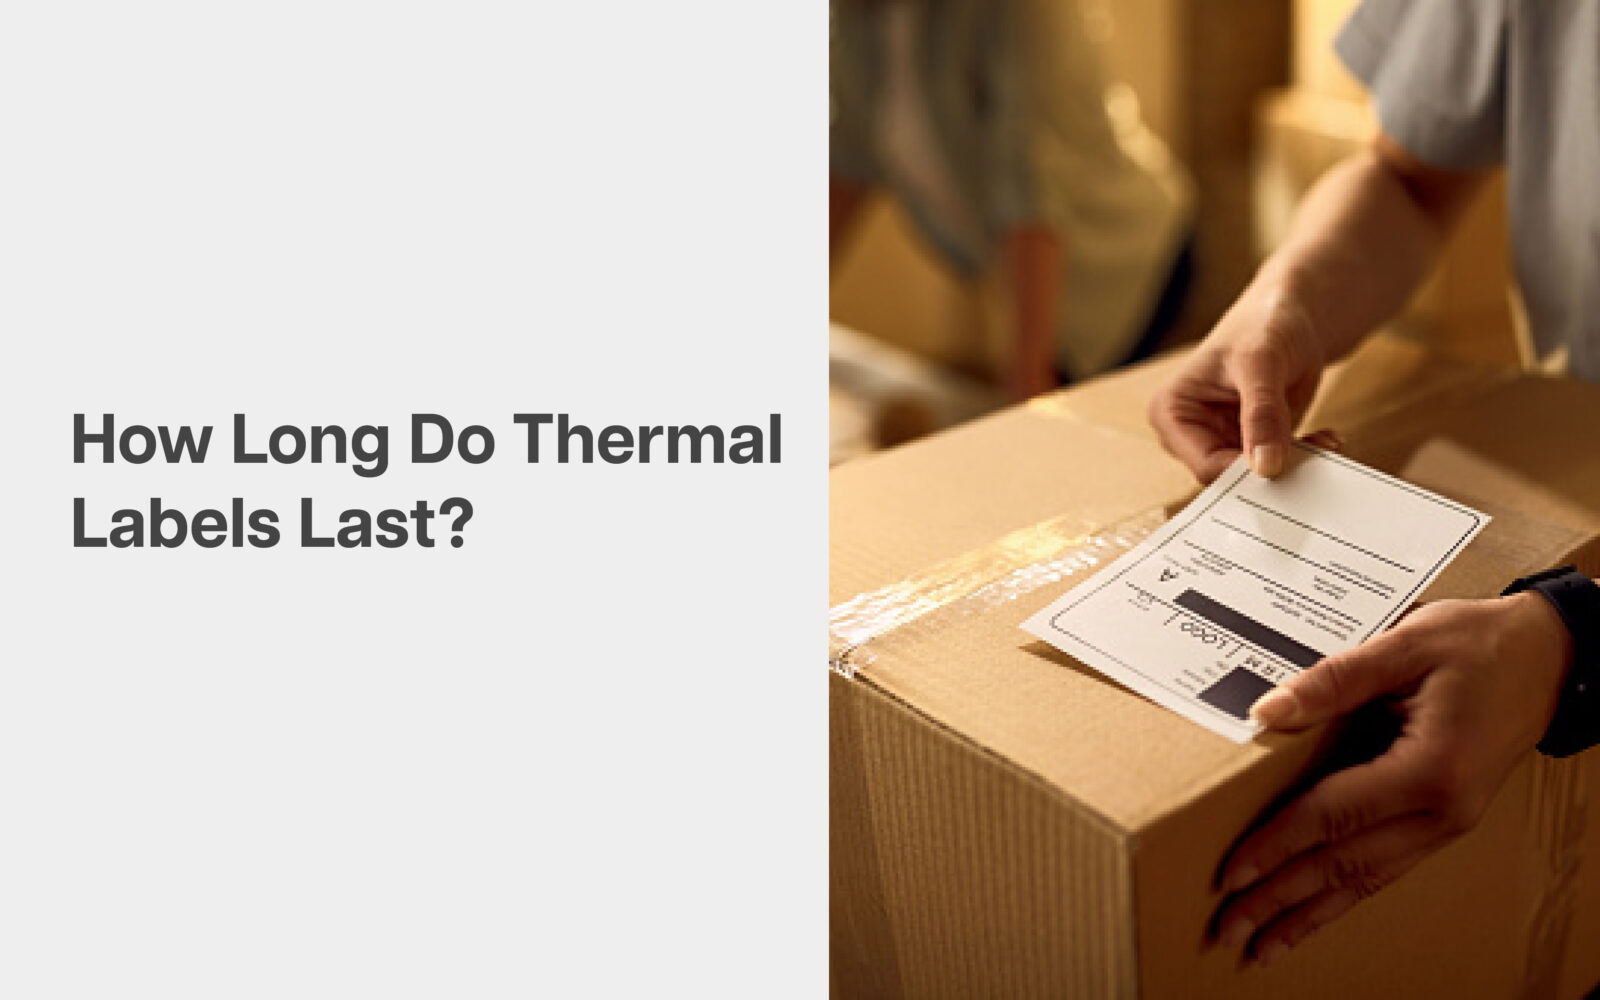 How Long Do Thermal Labels Last?